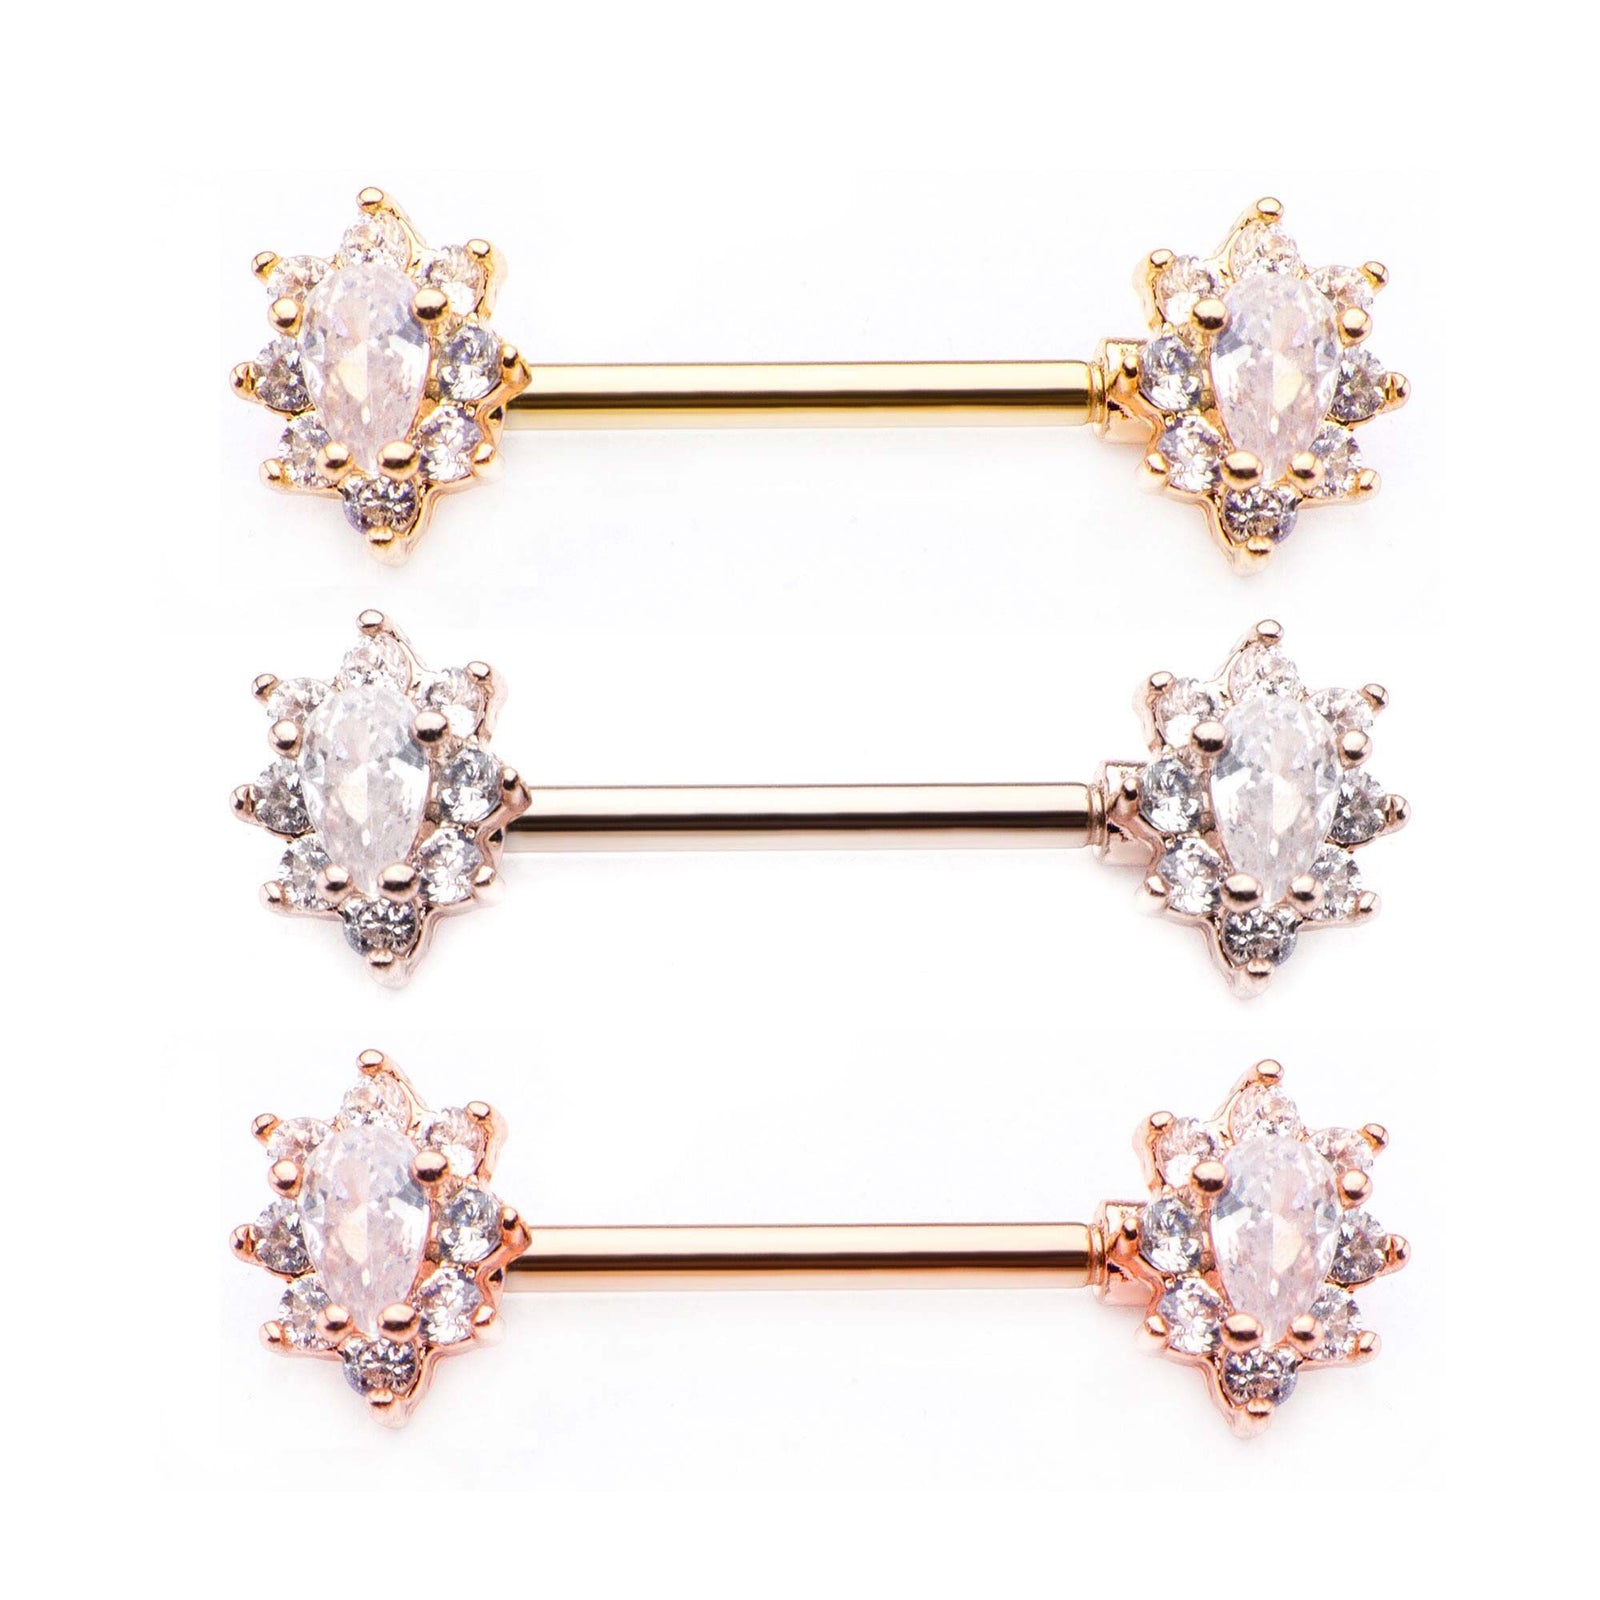 14g 9/16 Forward Facing Oval Cluster Clear CZ Nipple Barbells w/ 8.9mm ends. - 1 Pair sbvnp45713